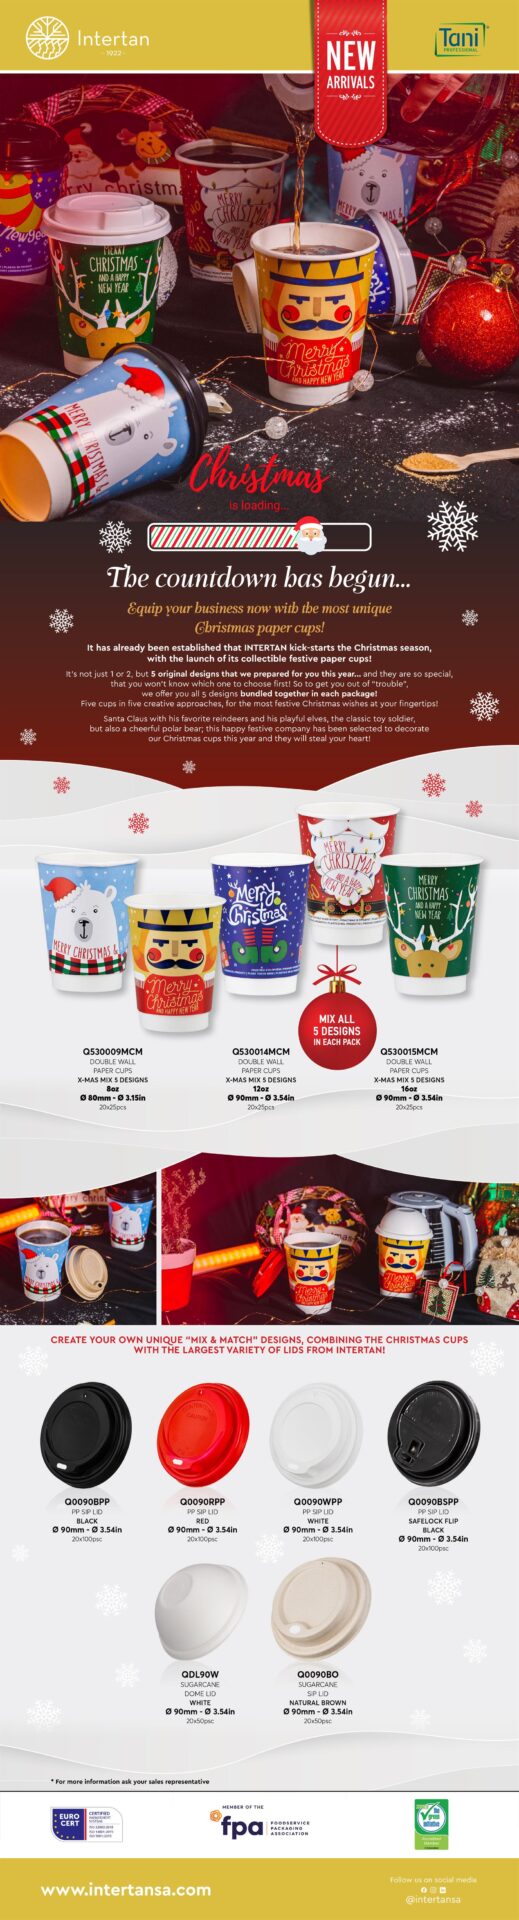 INTERTAN'S Christmas Cups have arrived Newsletter | Intertan S.A.